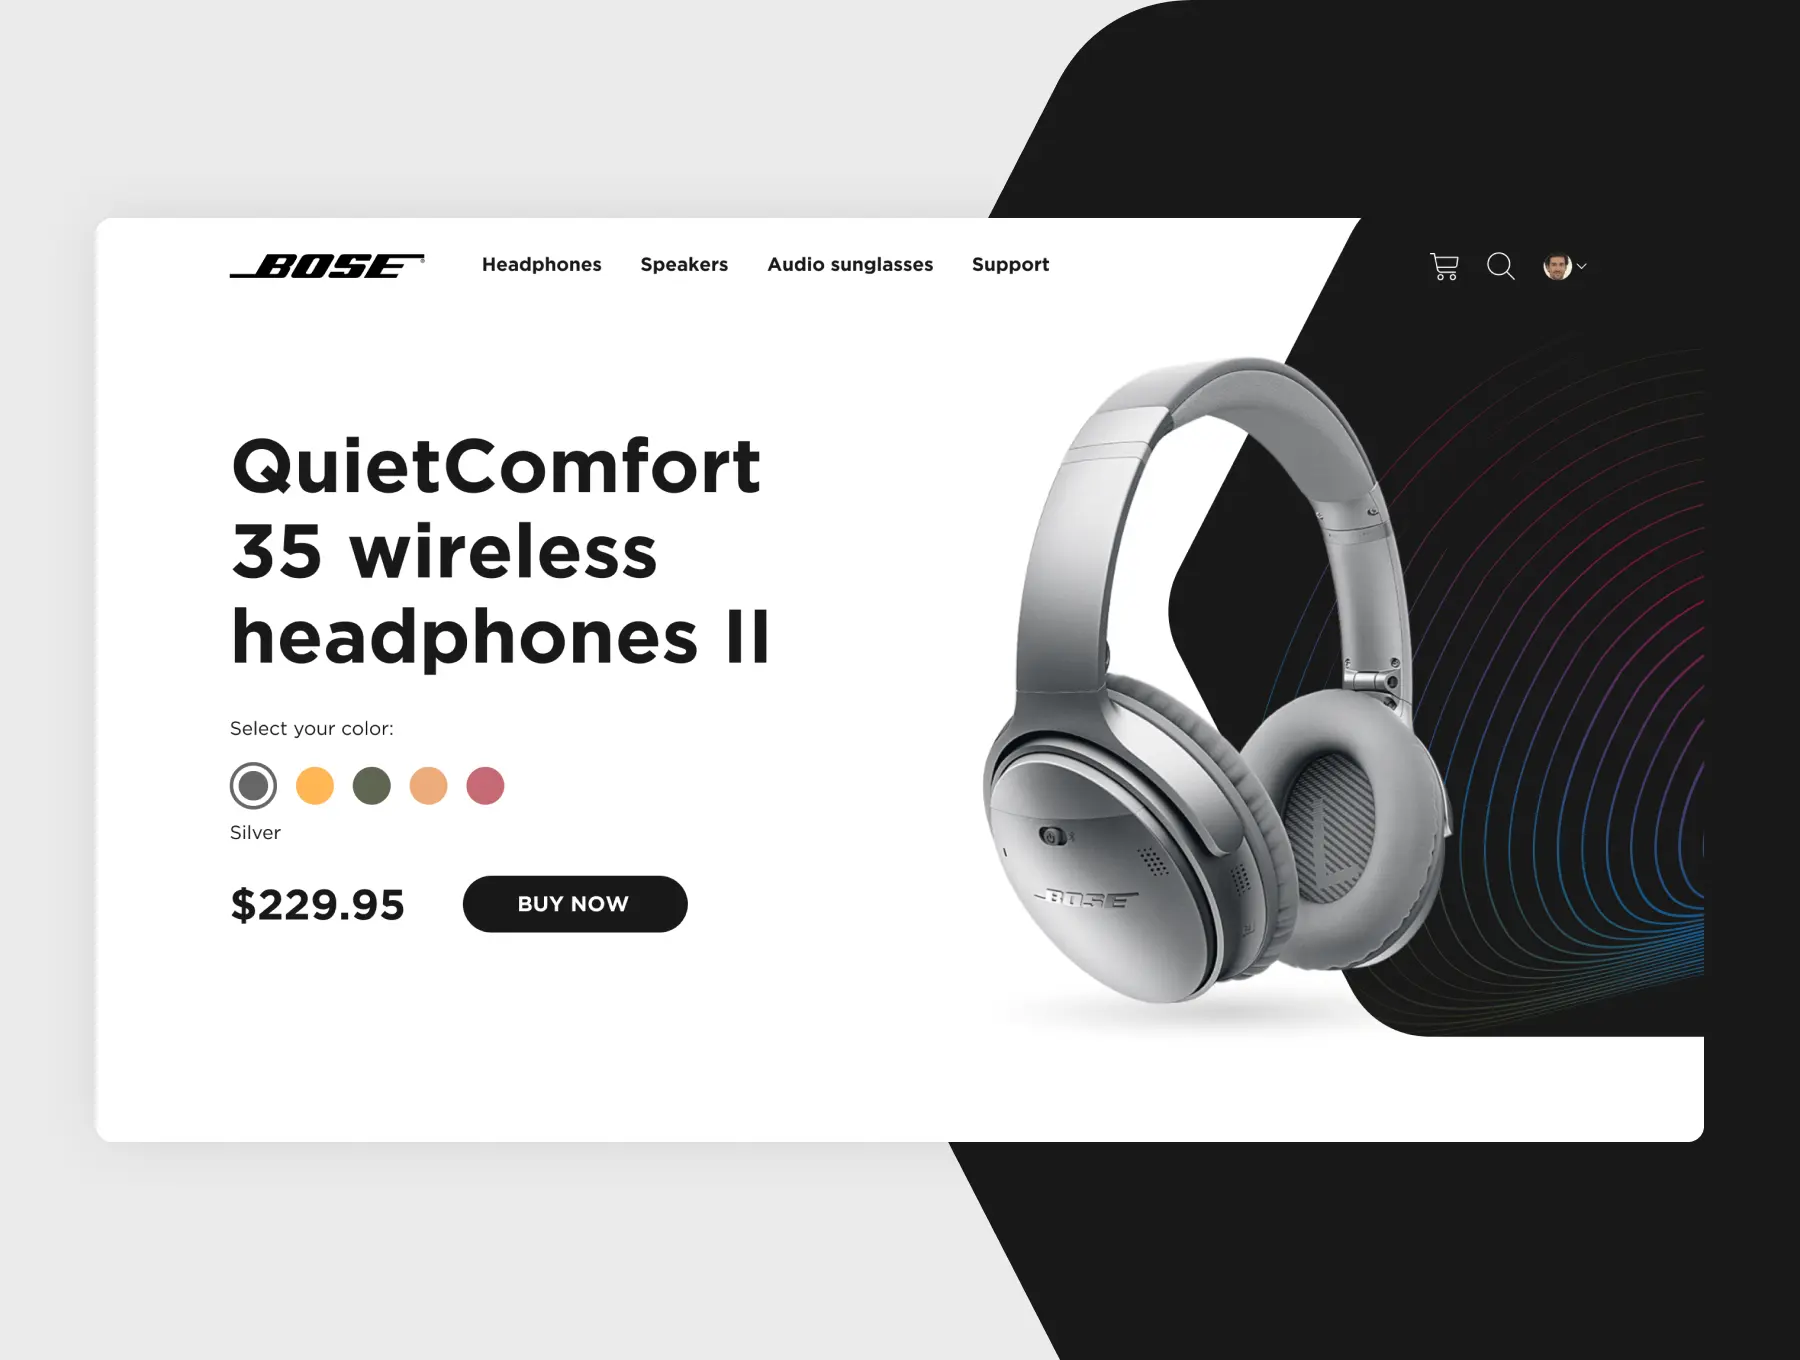 Product Page screen design idea #297: Headphones product page – TomWeb